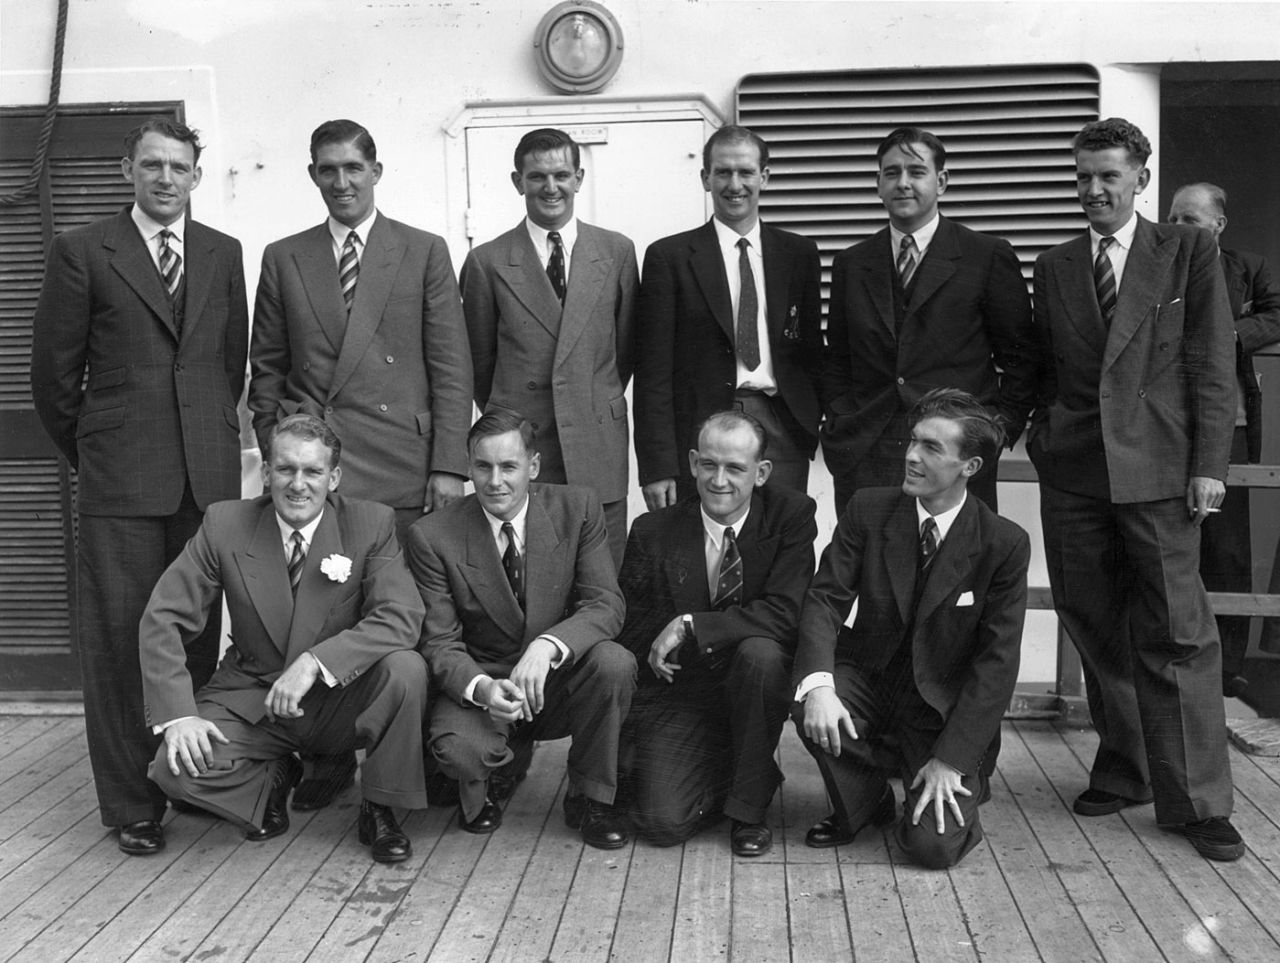 Members of the England team before departing for Australia and New Zealand in 1954, England, September 15, 1954